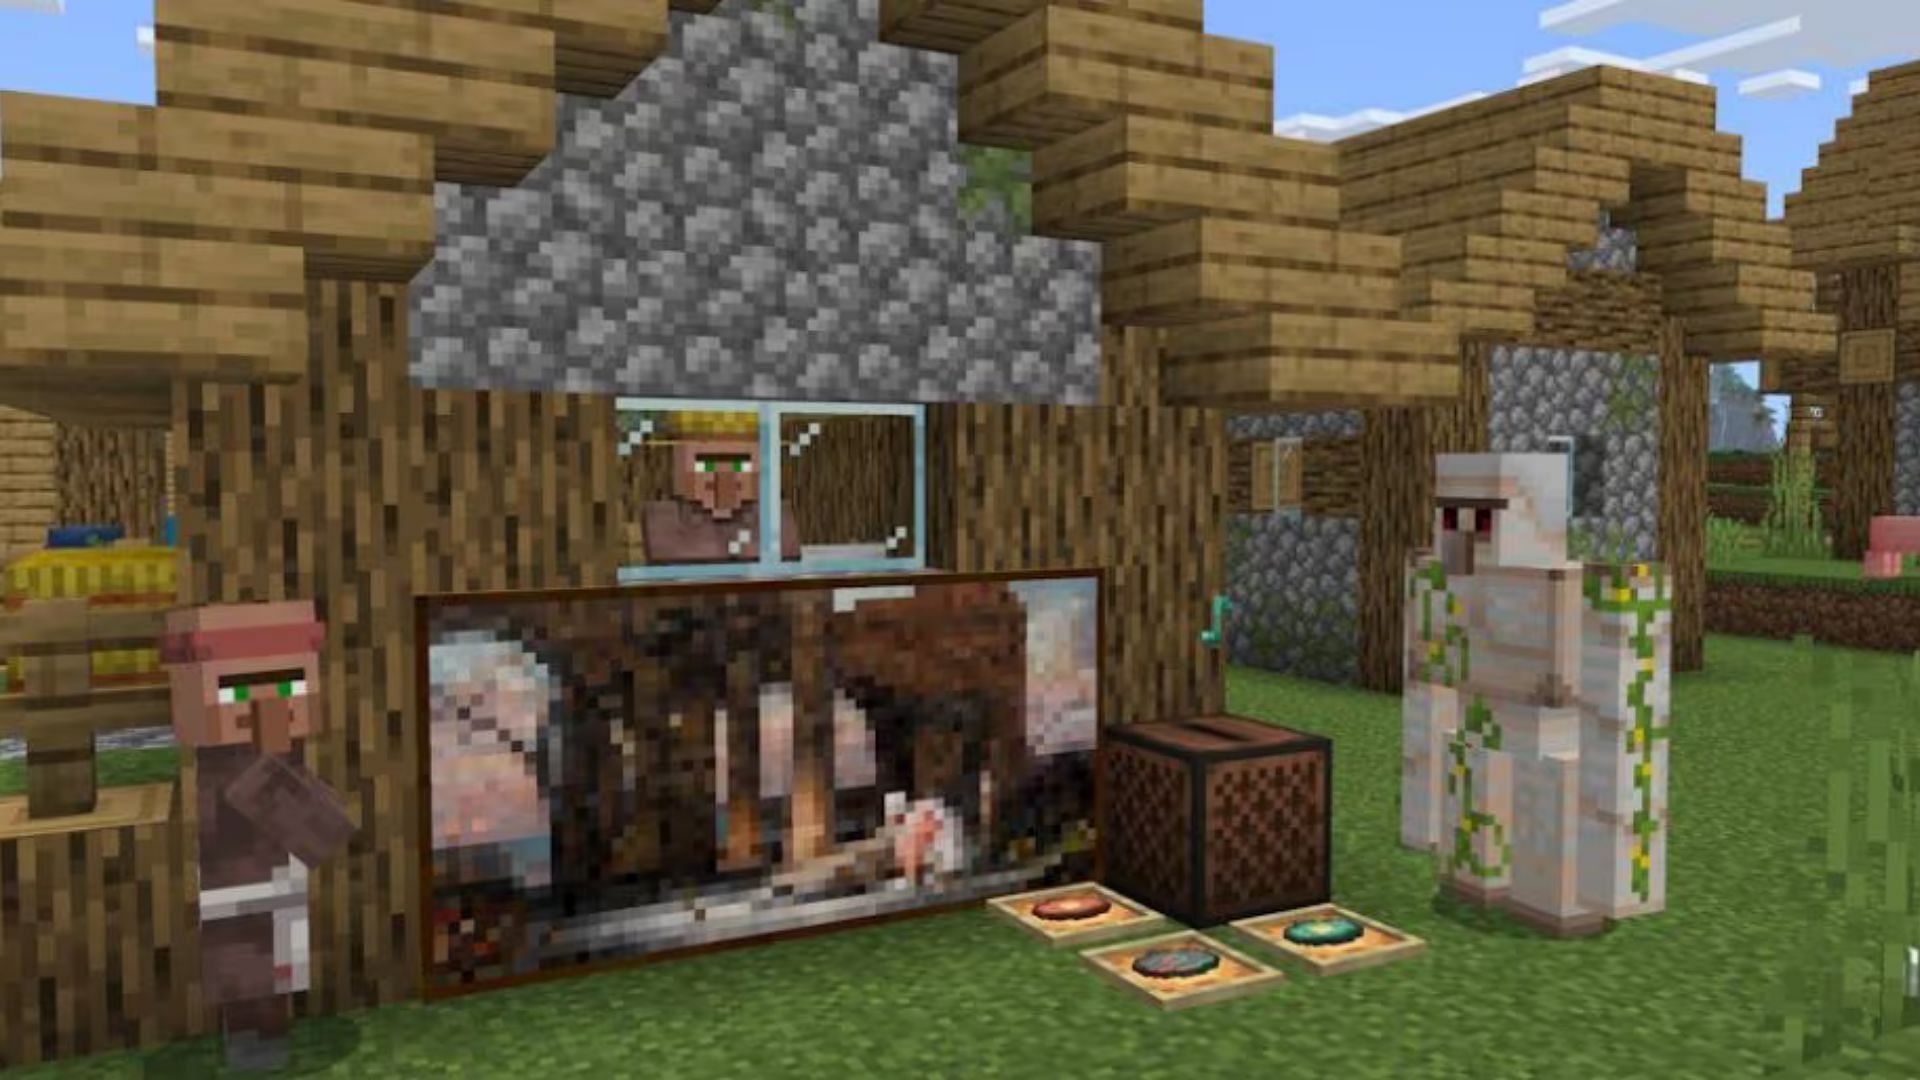 Players can explore the world in adventure mode (Image via Mojang Studios)